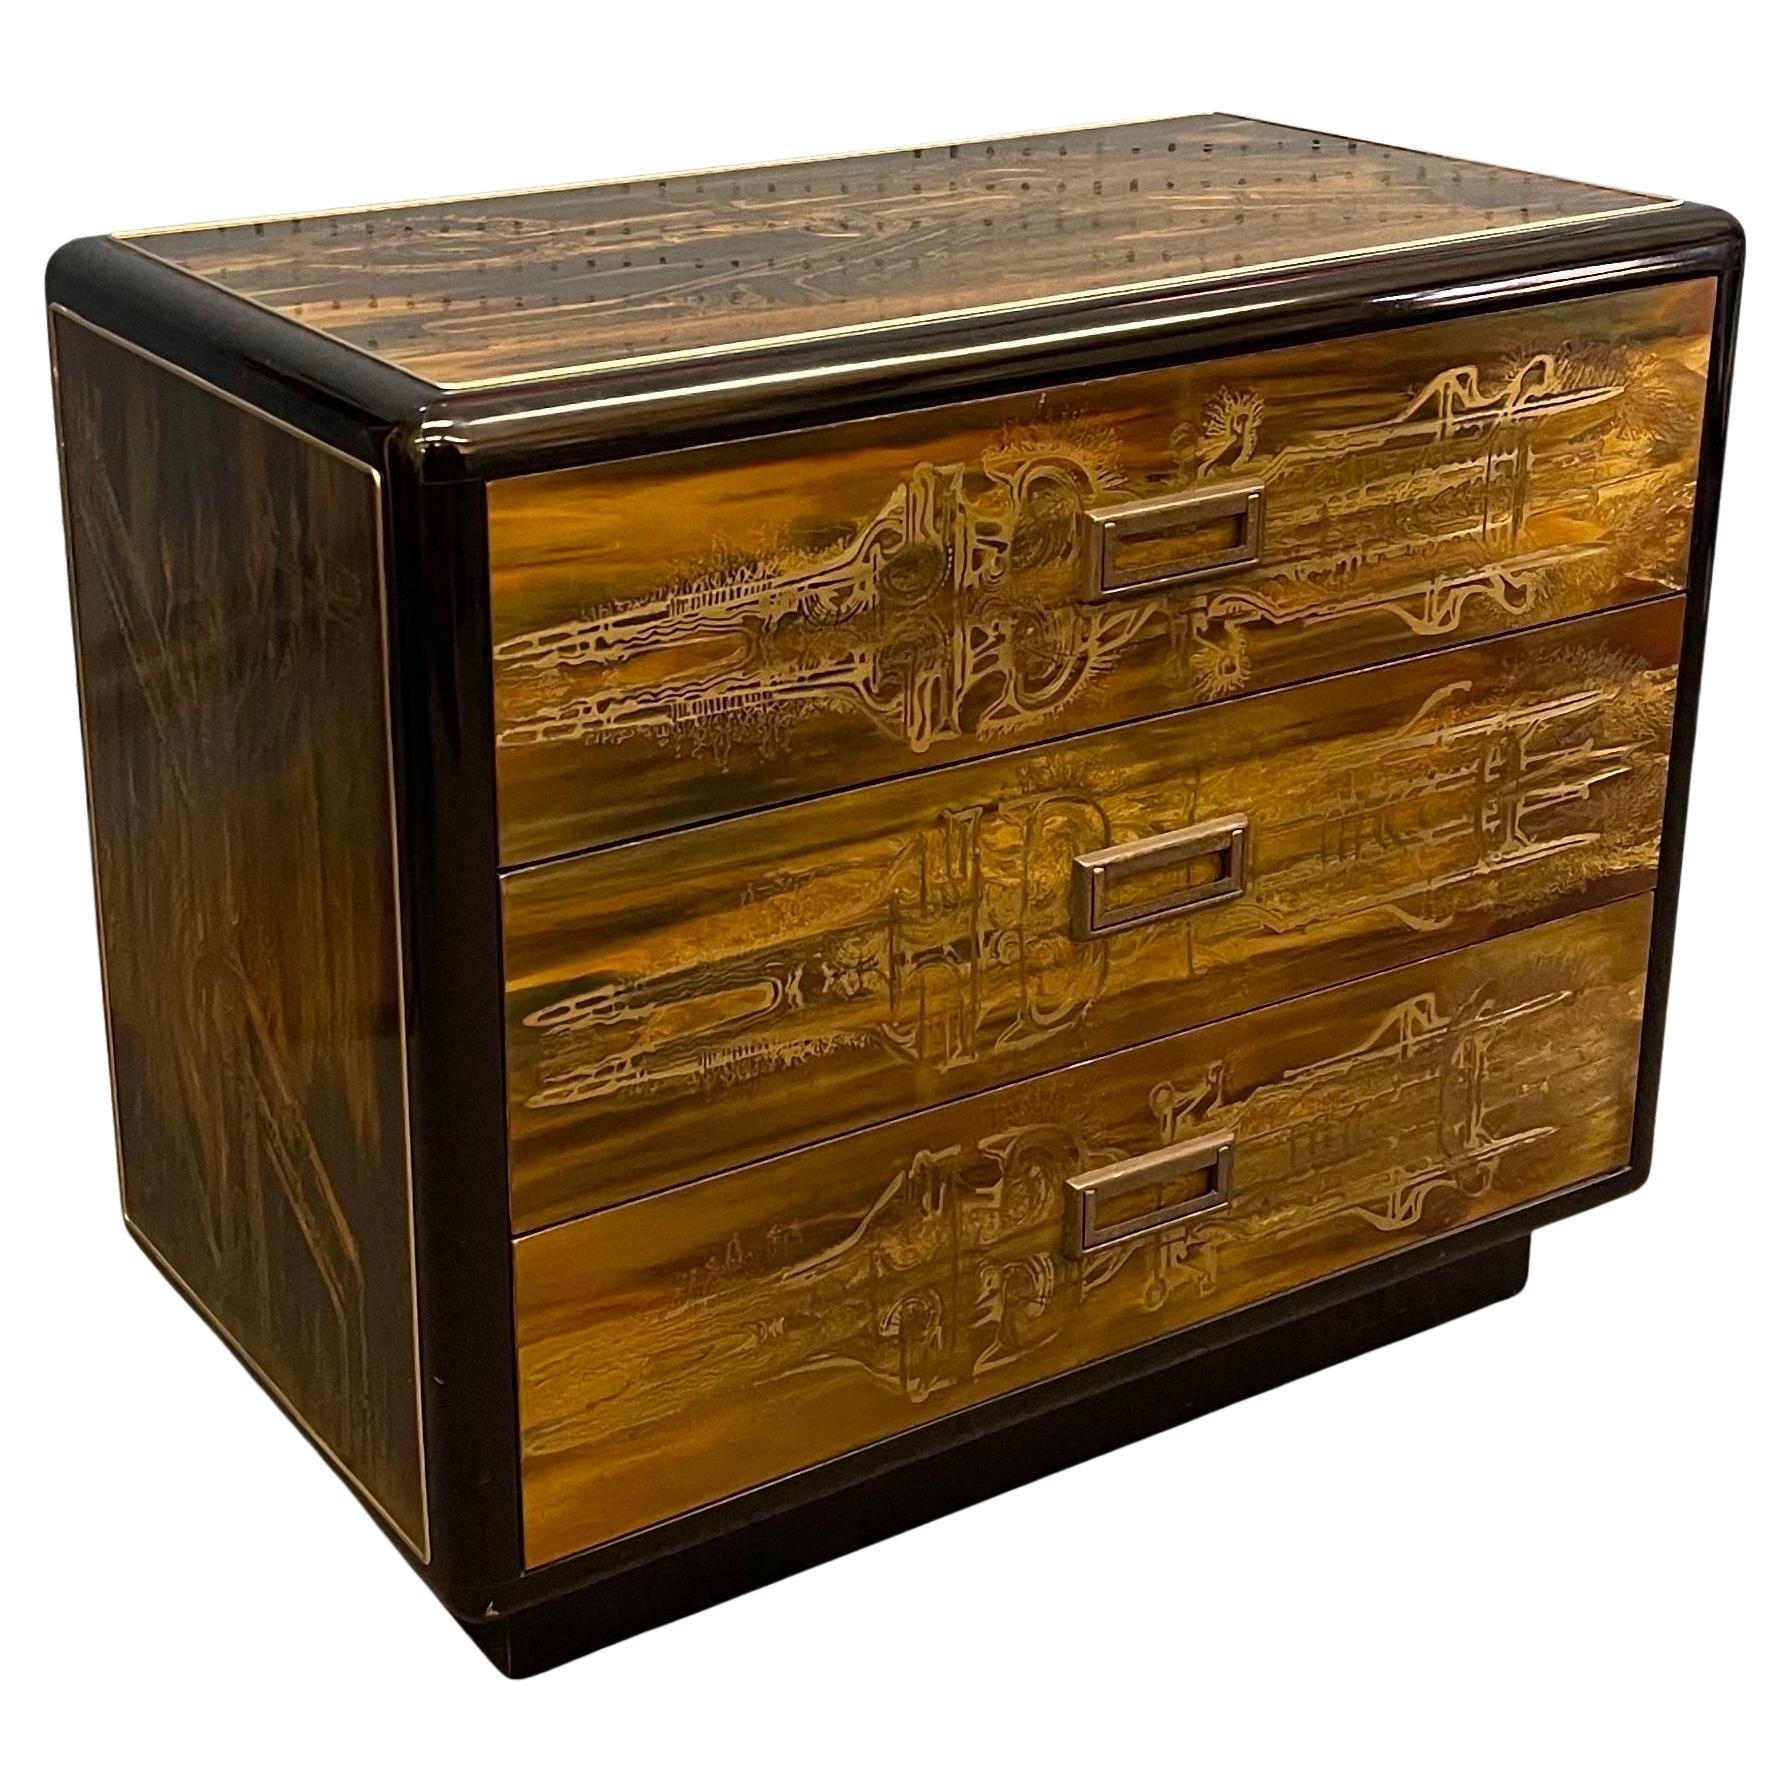 An exquisite and rare pair of acid-etched brass with ebony lacquer three drawer dressers / commodes by Bernhard Rohne for Mastercraft, circa 1970s. Covering each case are abstract designs in Rohne's signature surface treatment of acid-etched brass